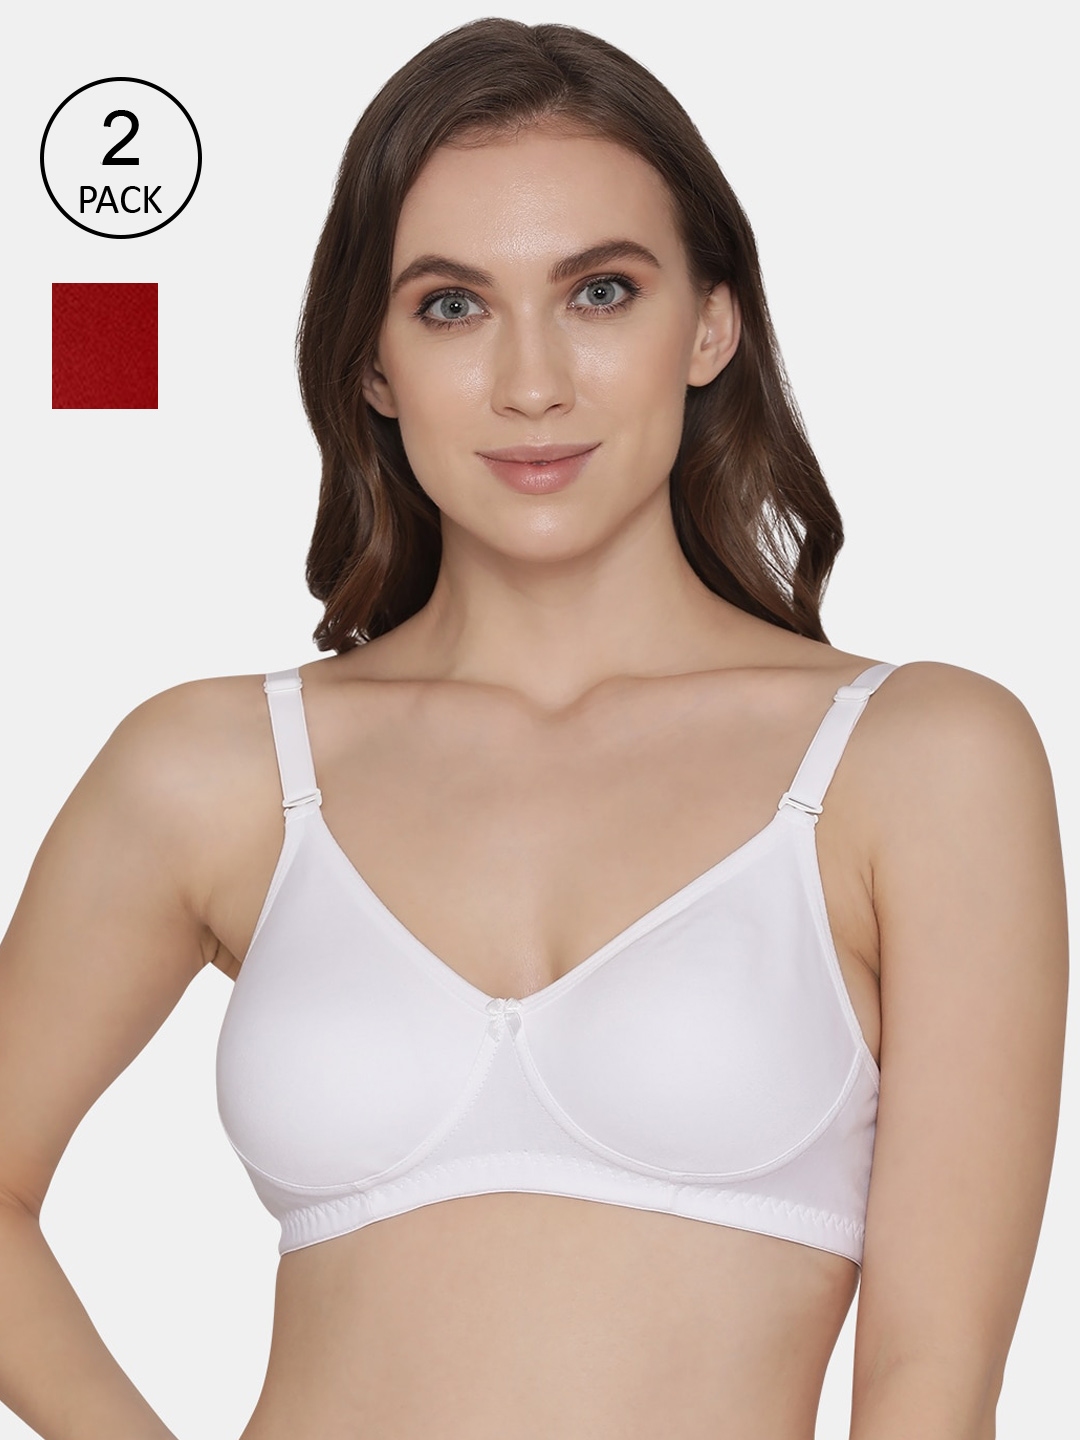 Buy Souminie Pack of 2 Non Padded Cotton T Shirt Bra - Pink Online at Low  Prices in India 